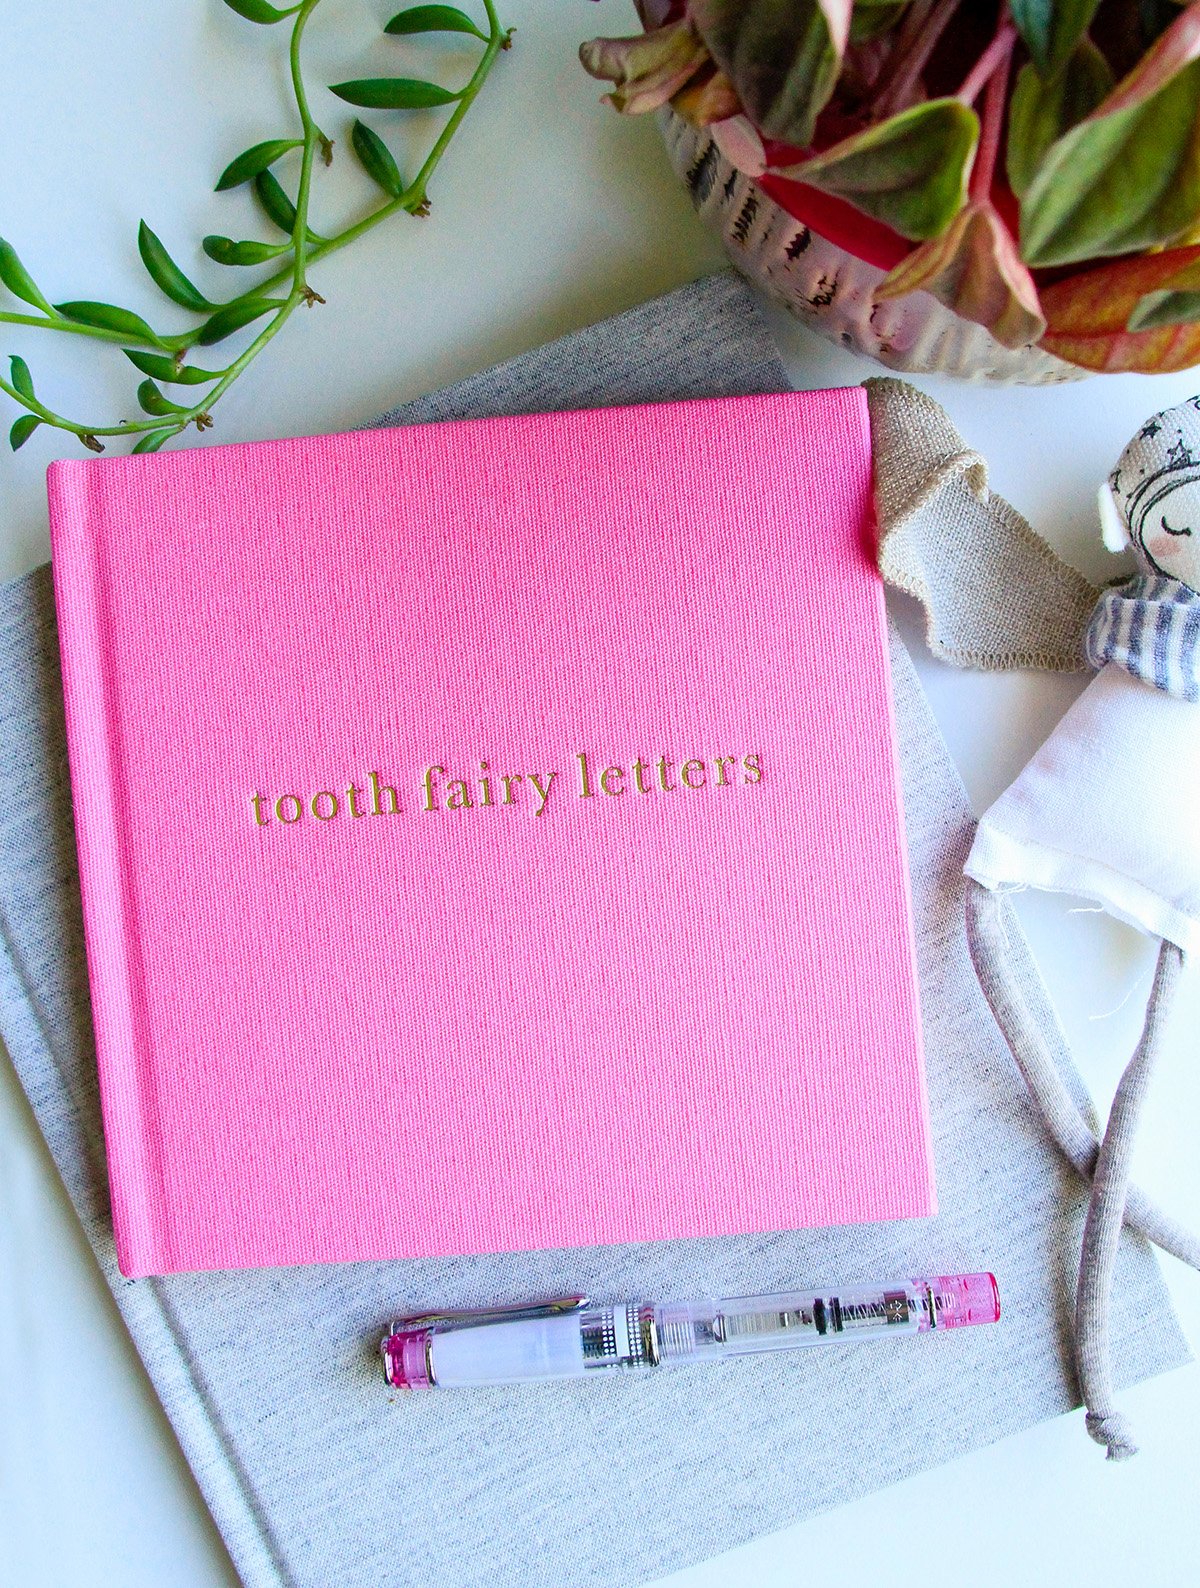 Tooth Fairy Letters. Pink